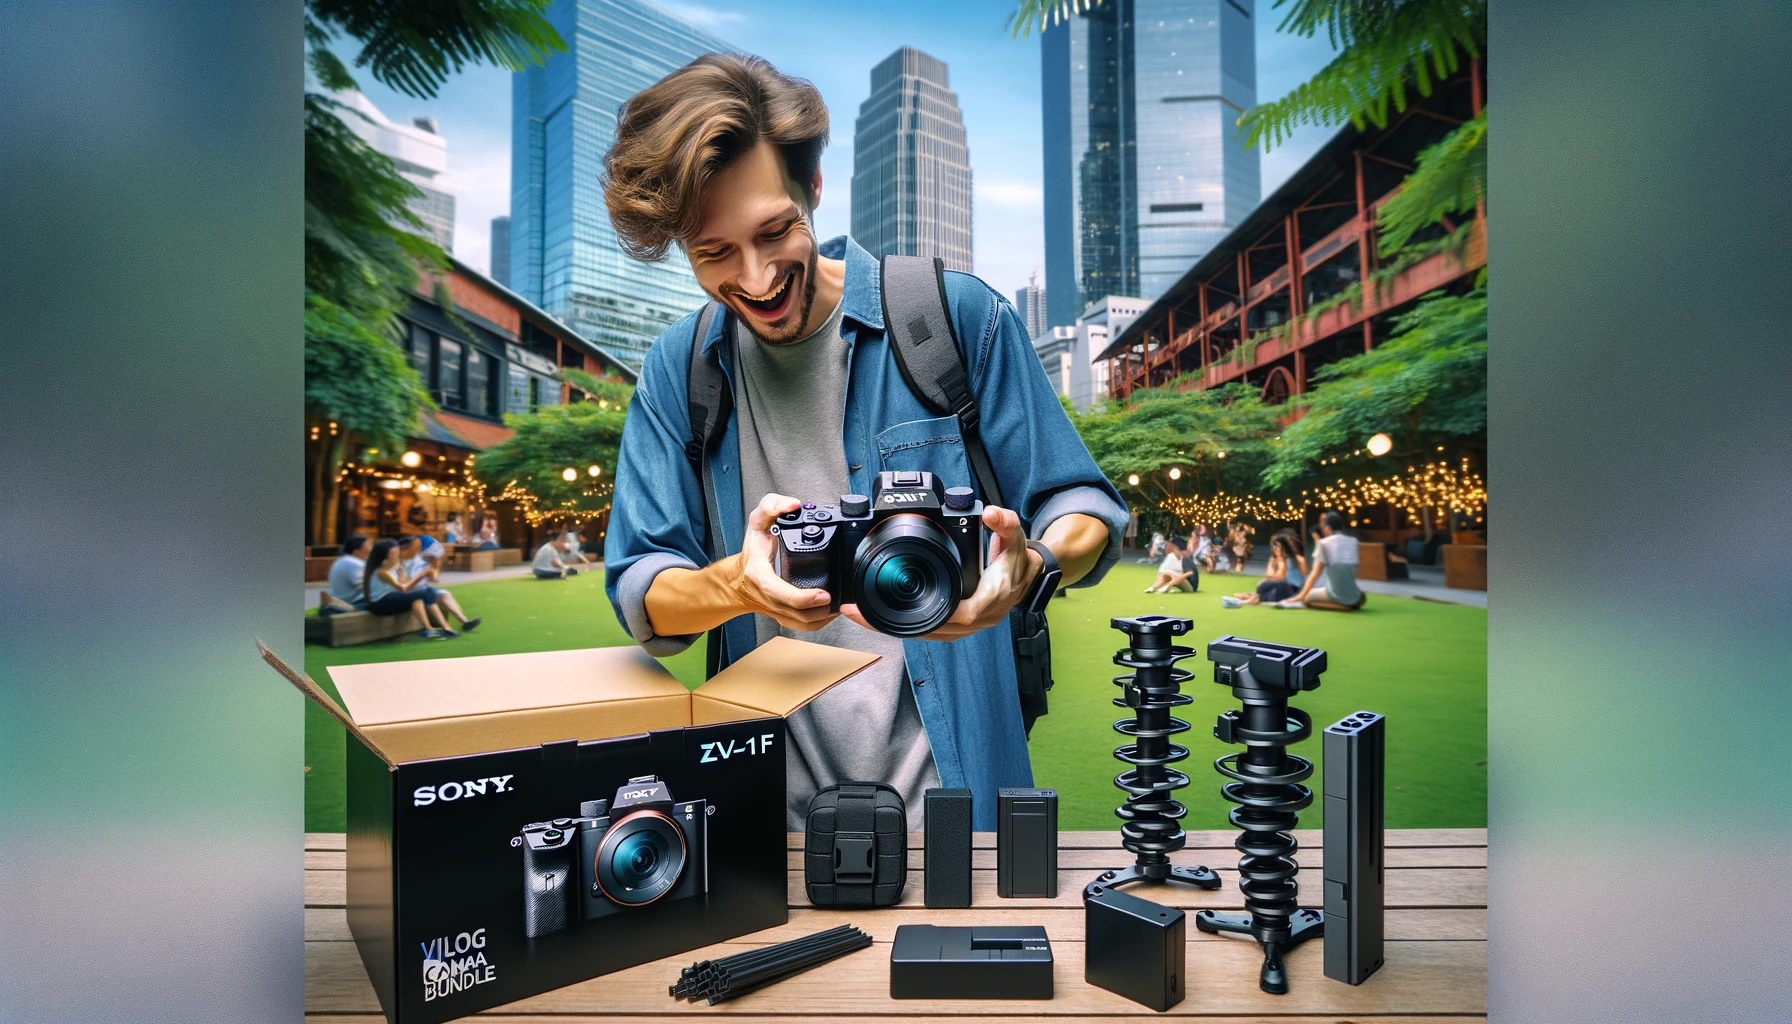 The image portrays a content creator unpacking the Sony ZV-1F Vlog Camera Bundle in a lively urban park, with the city's skyscrapers forming a dynamic backdrop. This scene emphasizes the bundle's appeal to vloggers and content creators who are always on the move, needing a versatile and comprehensive setup that can handle the vibrant pace of urban life. The creator's engagement with the camera and its accessories underlines the bundle's readiness to support a day filled with content creation, capturing the essence of city life.